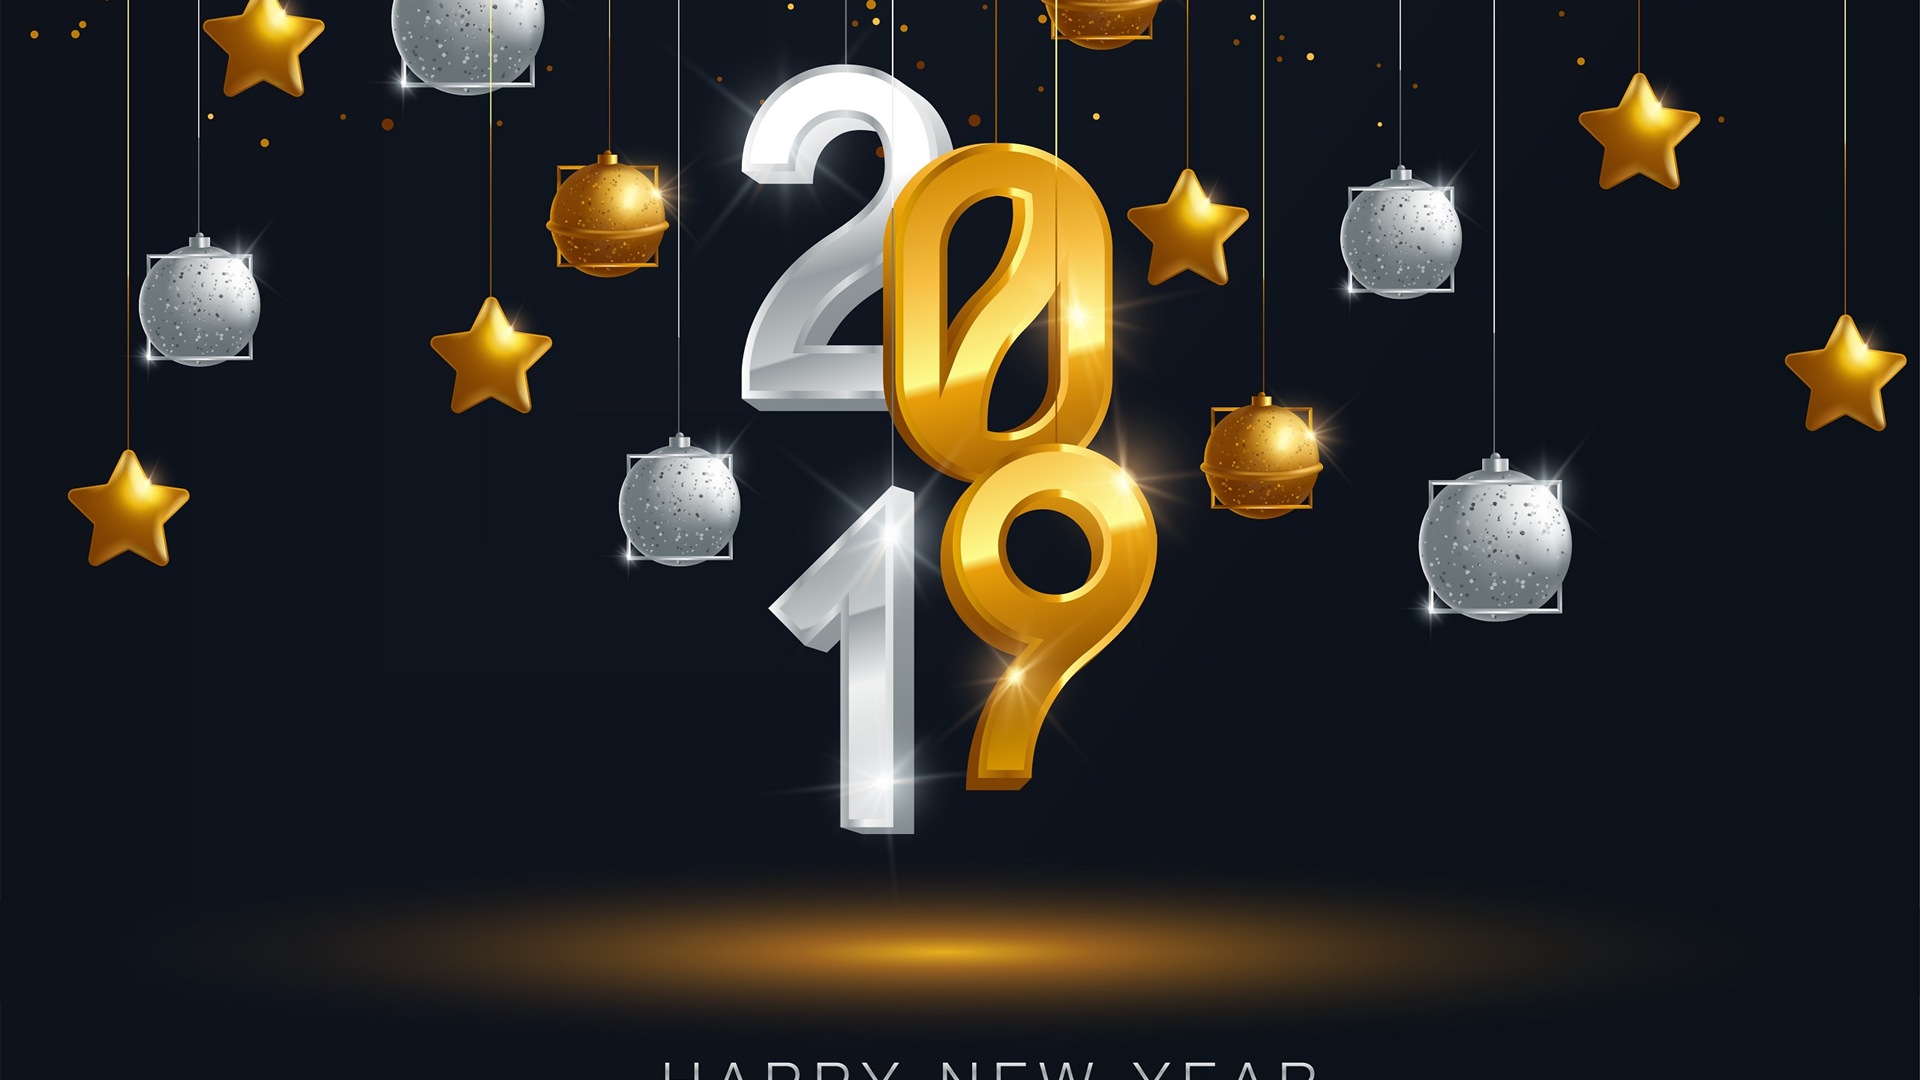 Happy New Year 2019 HD wallpapers #12 - 1920x1080